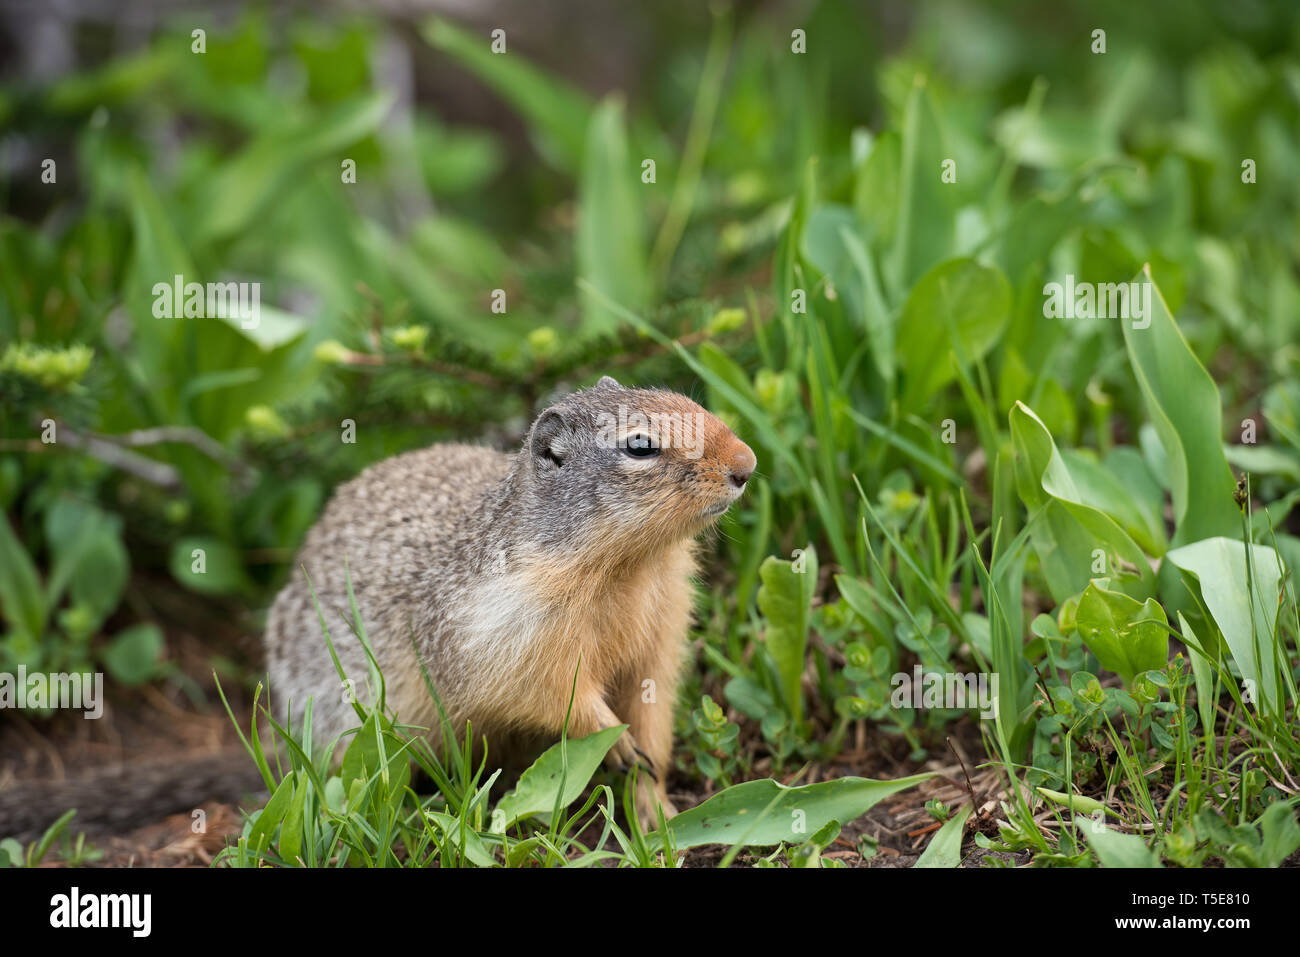 Close up of a Ground squirrel taken in Glacier National Park. Stock Photo